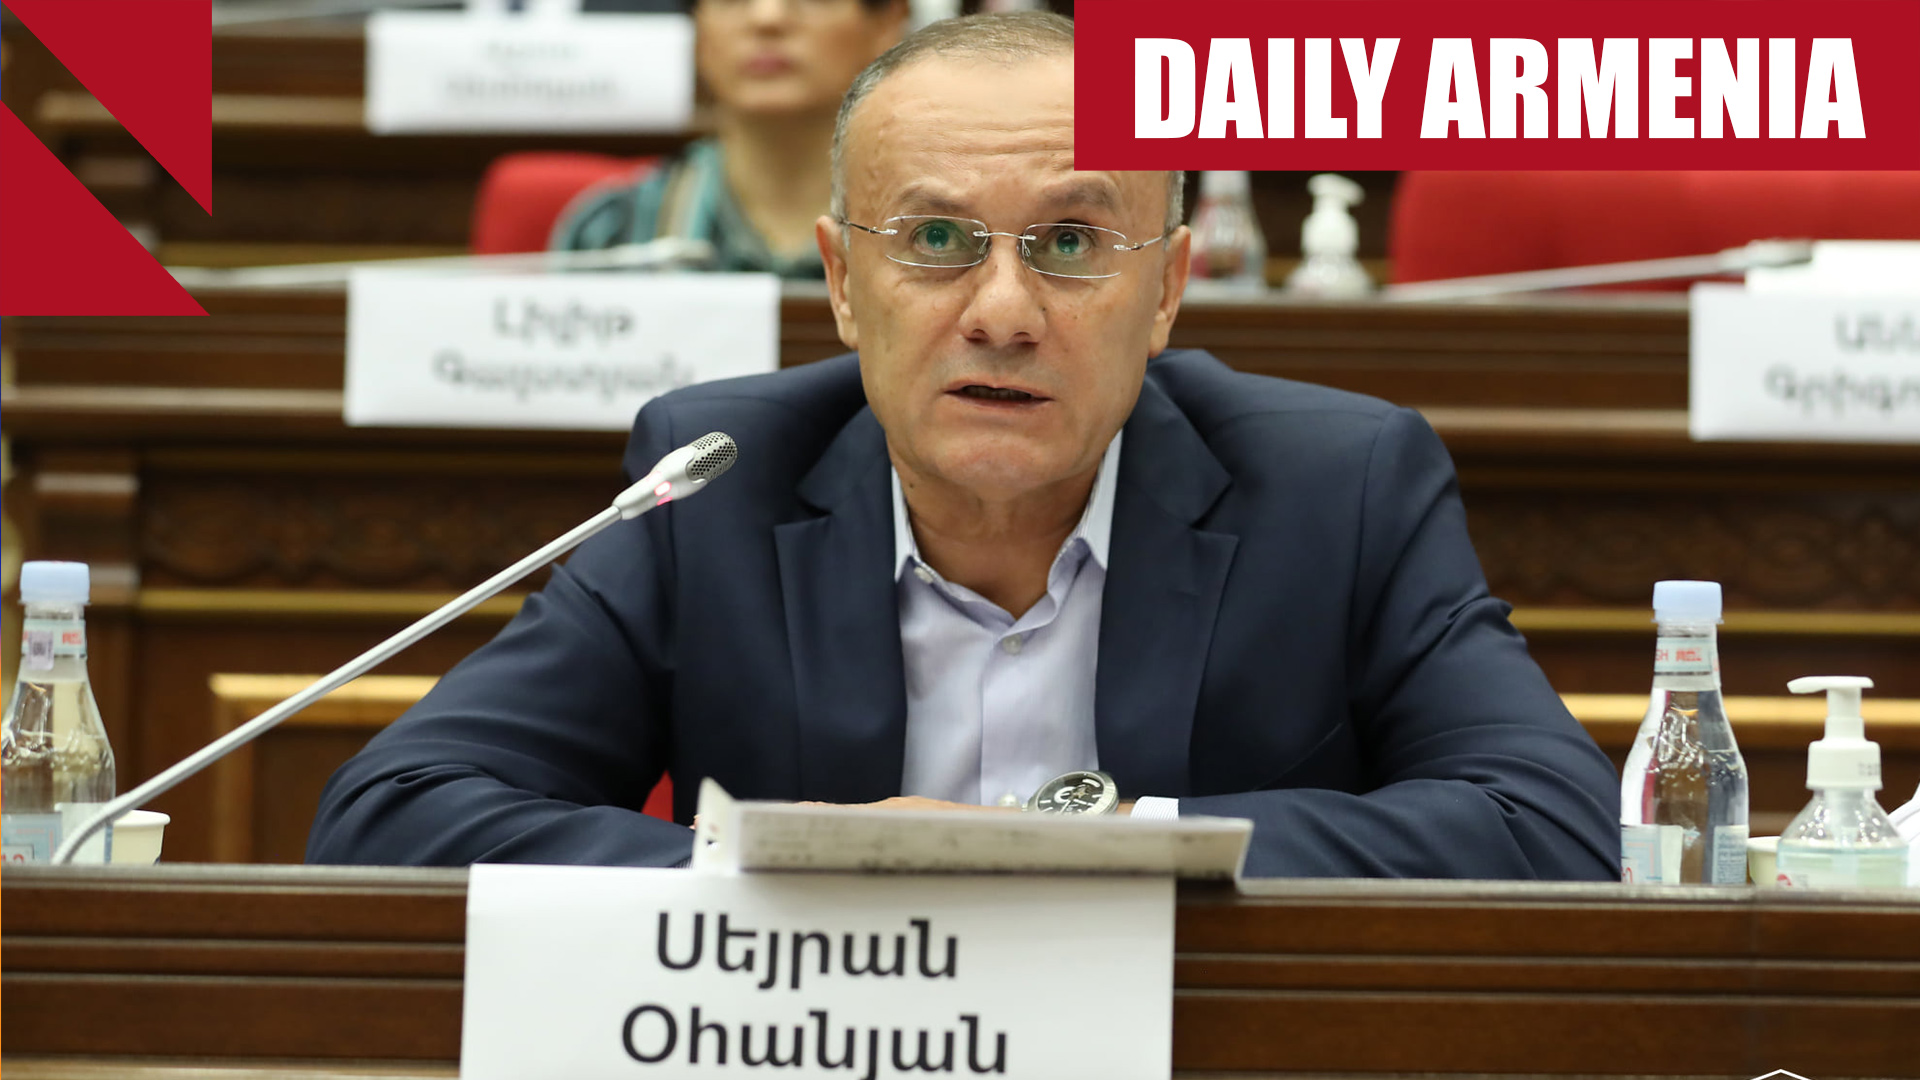 Opposition-leader-calls-on-army-to-disobey-prime-minister-over-planned-withdrawal-from-villages--թ